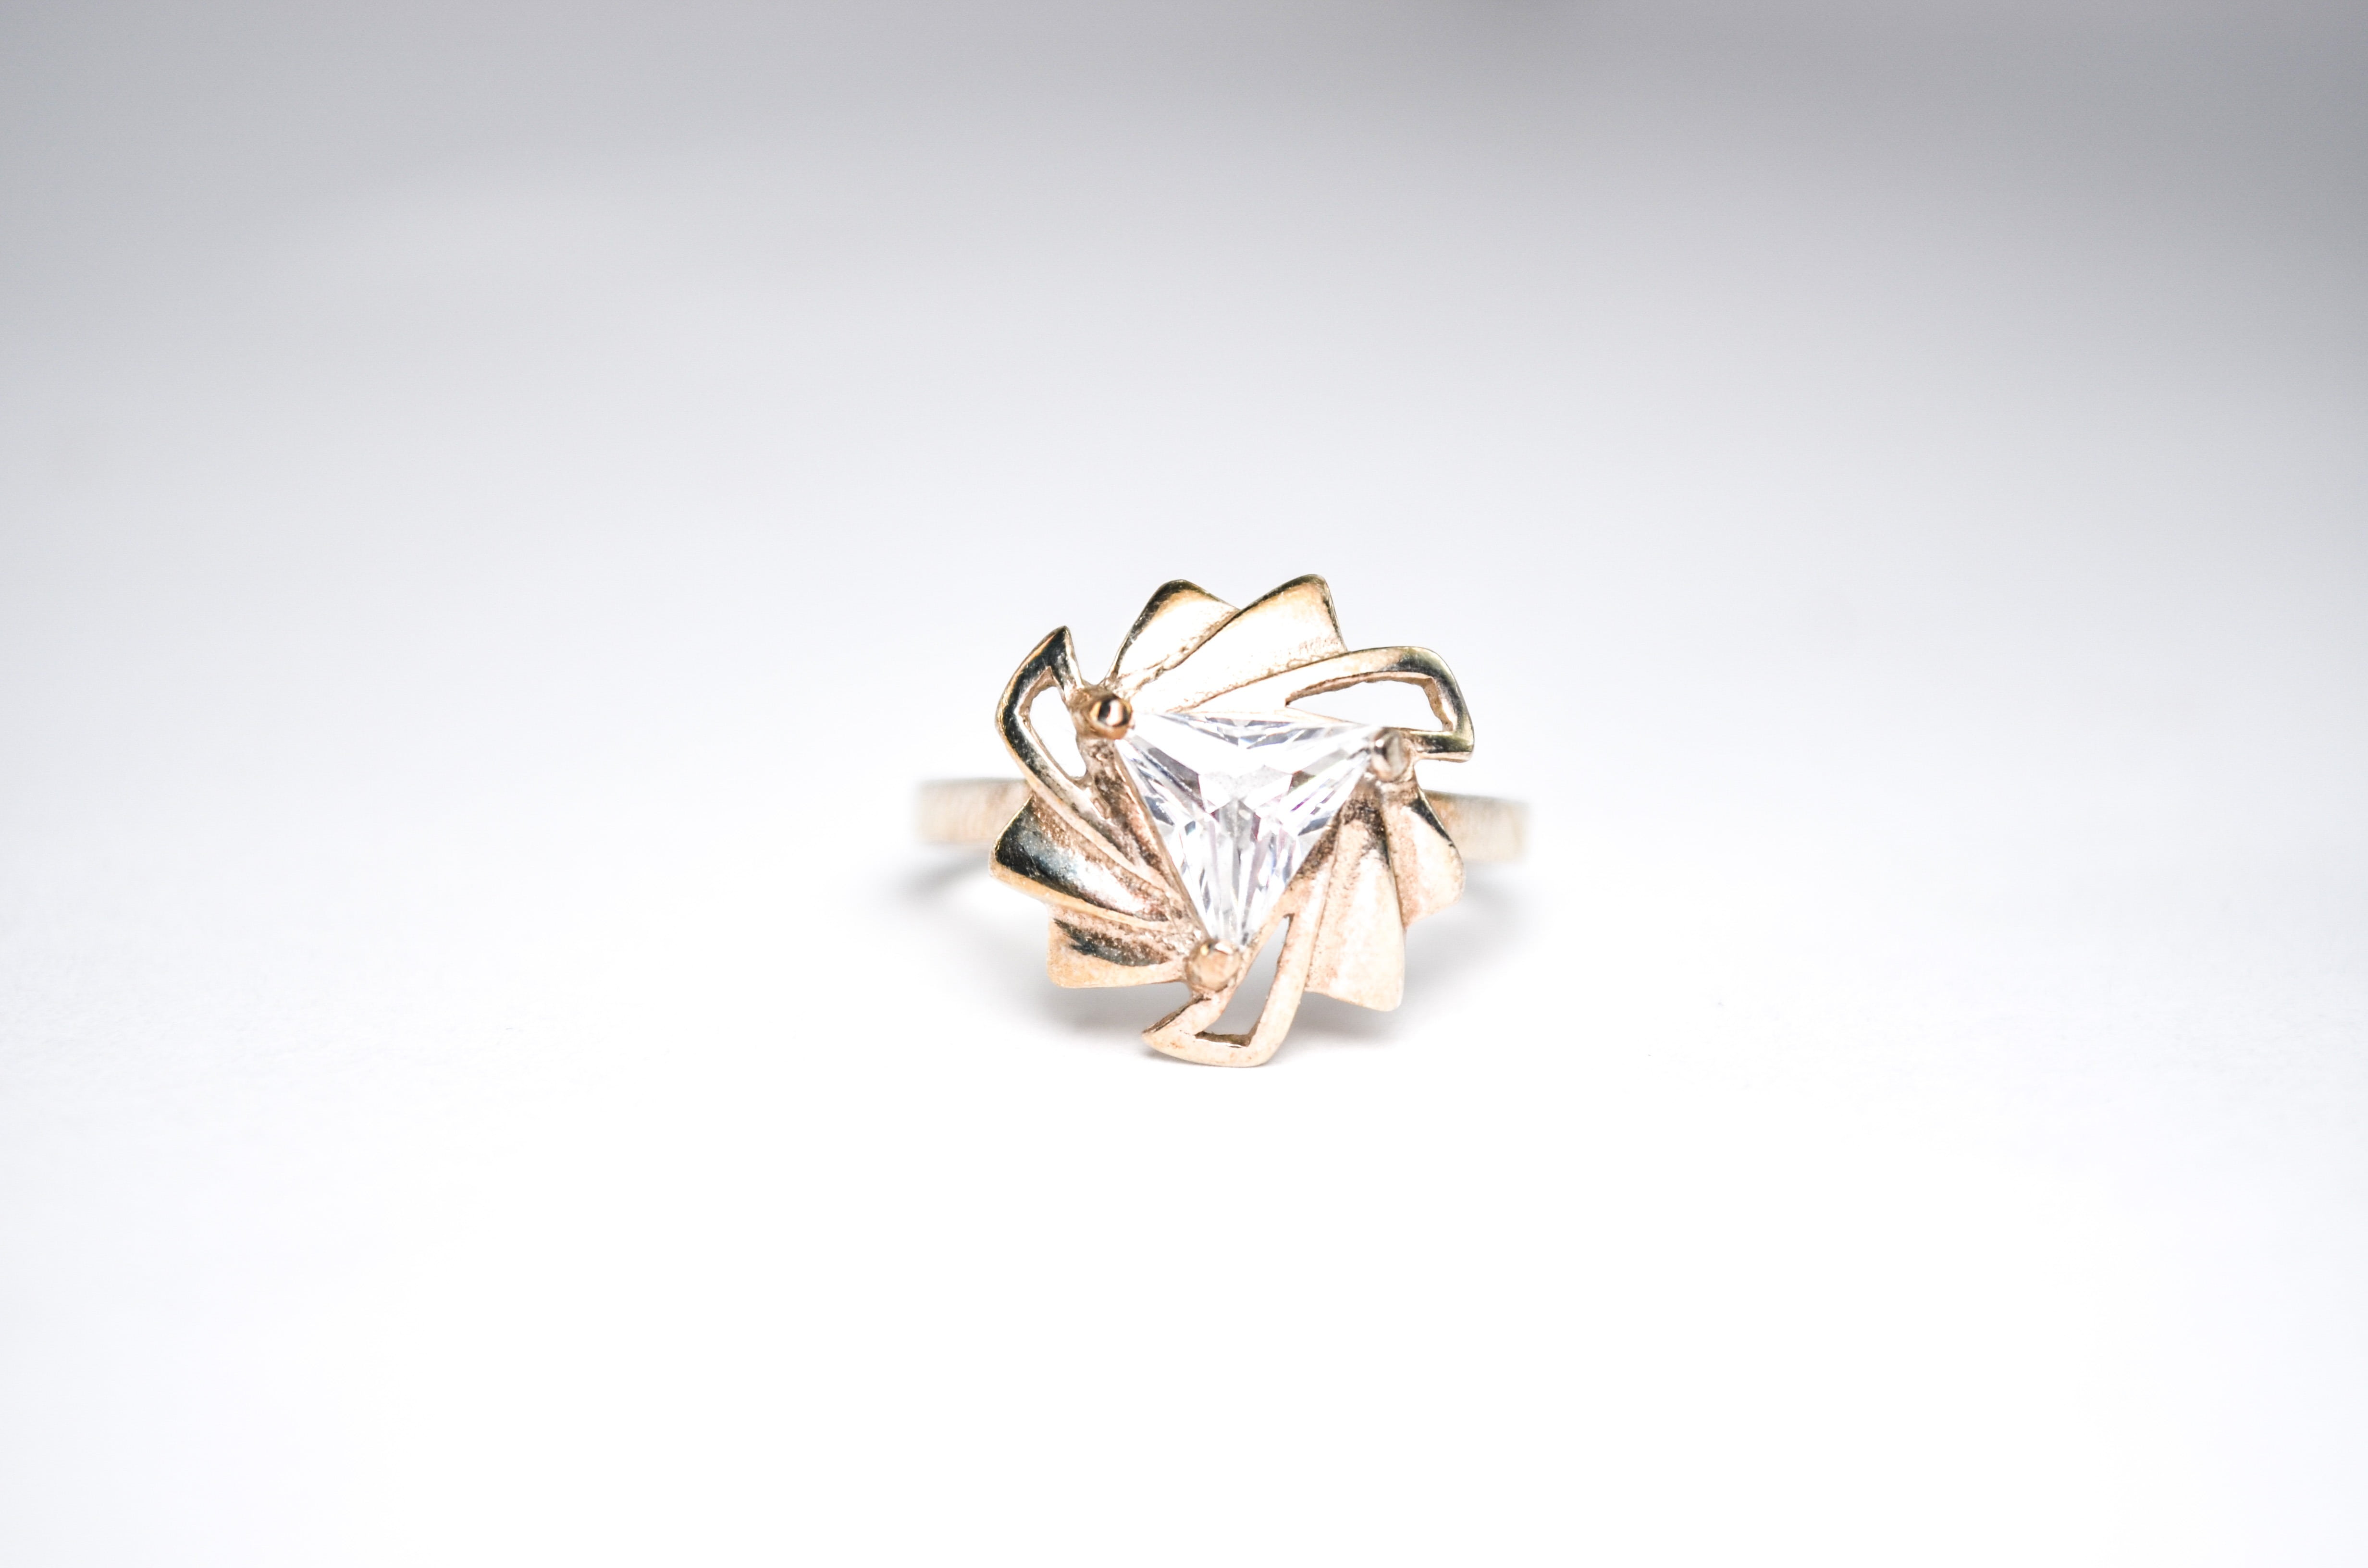 gold-colored clear gemstone encrusted ring on white surface, jewelry